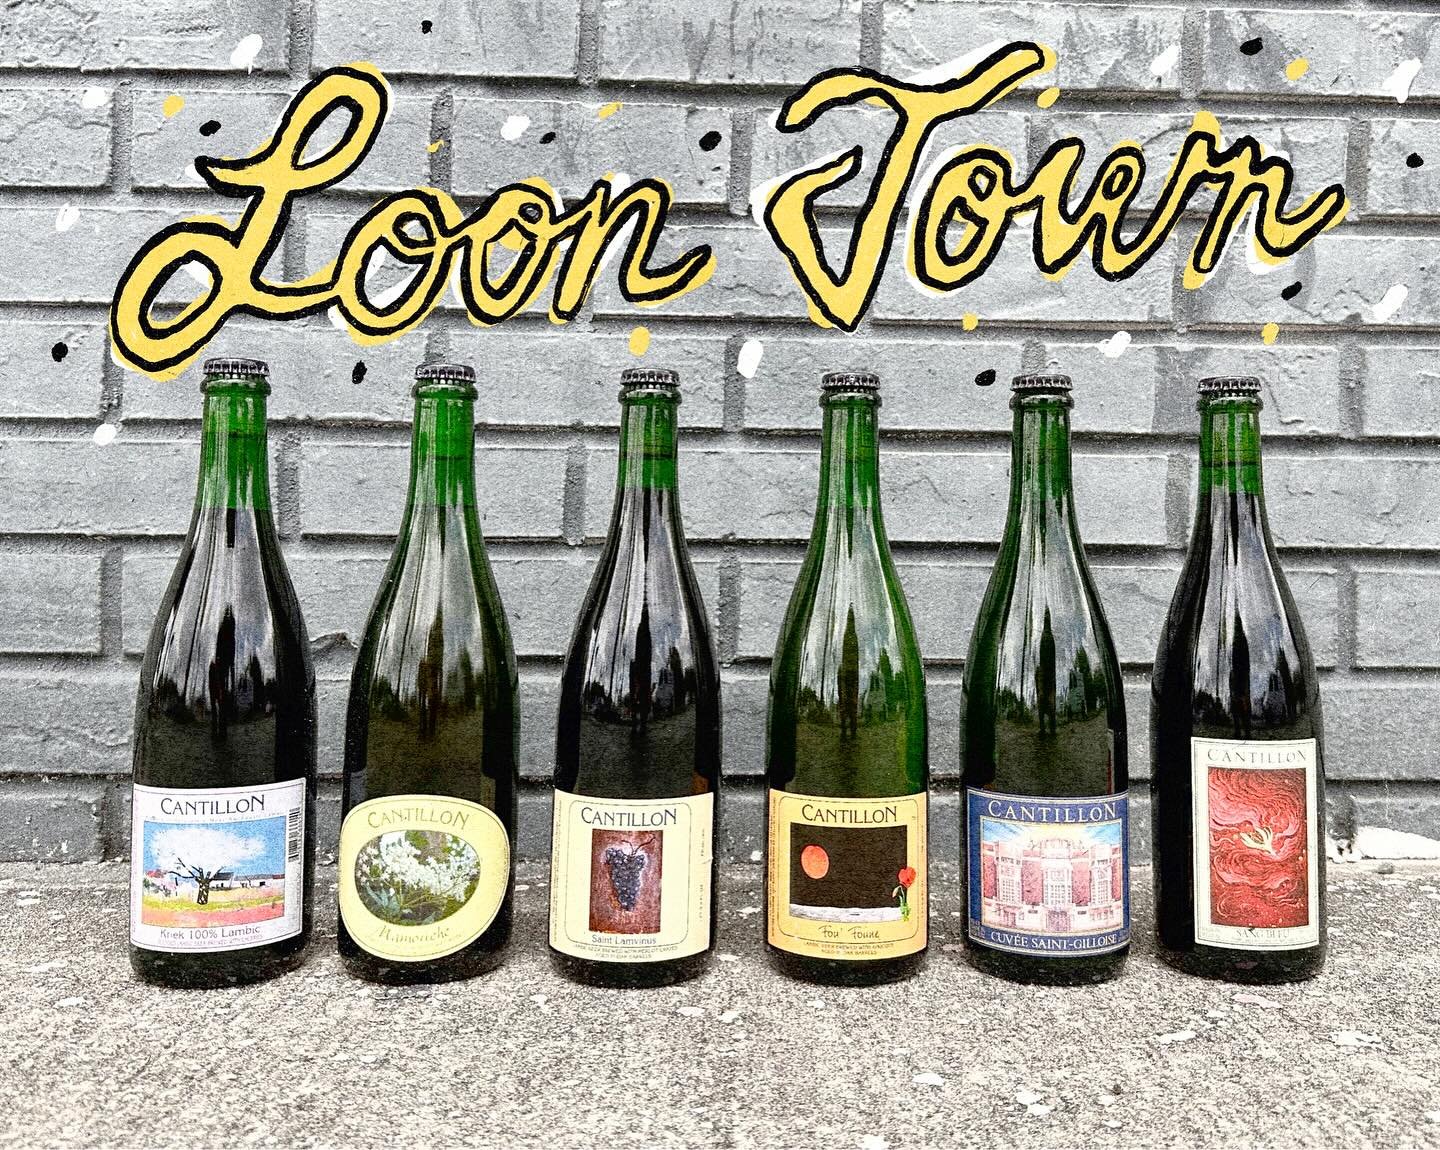 A late Friday treat for y&rsquo;all&hellip;

COME ON DOWN TO LOON TOWN.

We&rsquo;ve got a post-Zwanze drop of @brasseriecantillonofficiel  for yas. 

ON DRAFT: 
2021 Nath

PACKAGE: 
Classic Gueuze
Ros&eacute; de Gambrinus
Mamouche
Cuv&eacute;e Saint